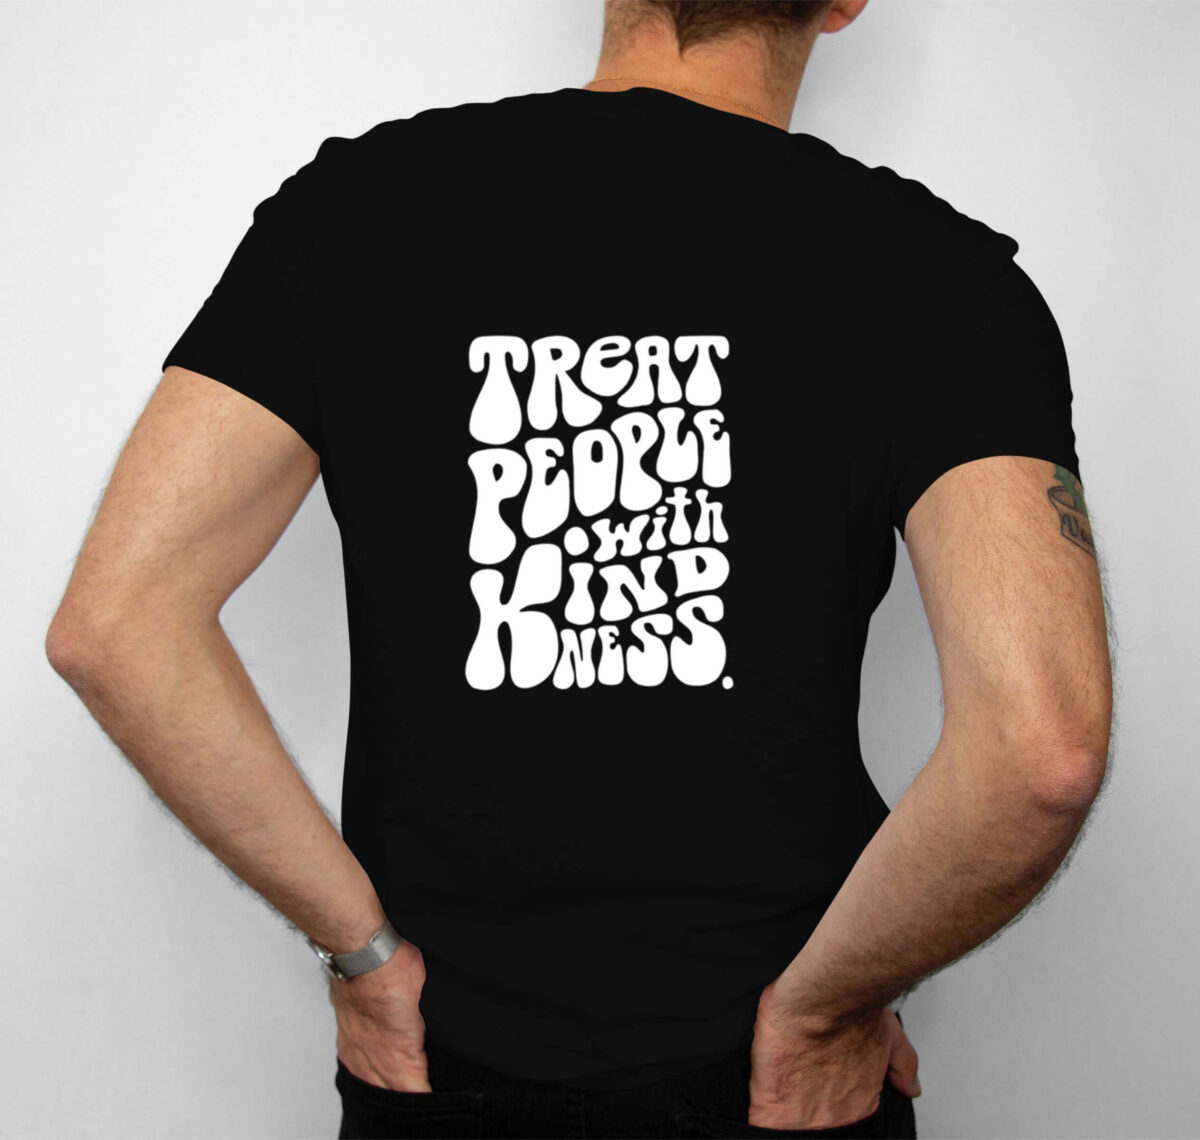 Treat People With Kindness T-Shirt